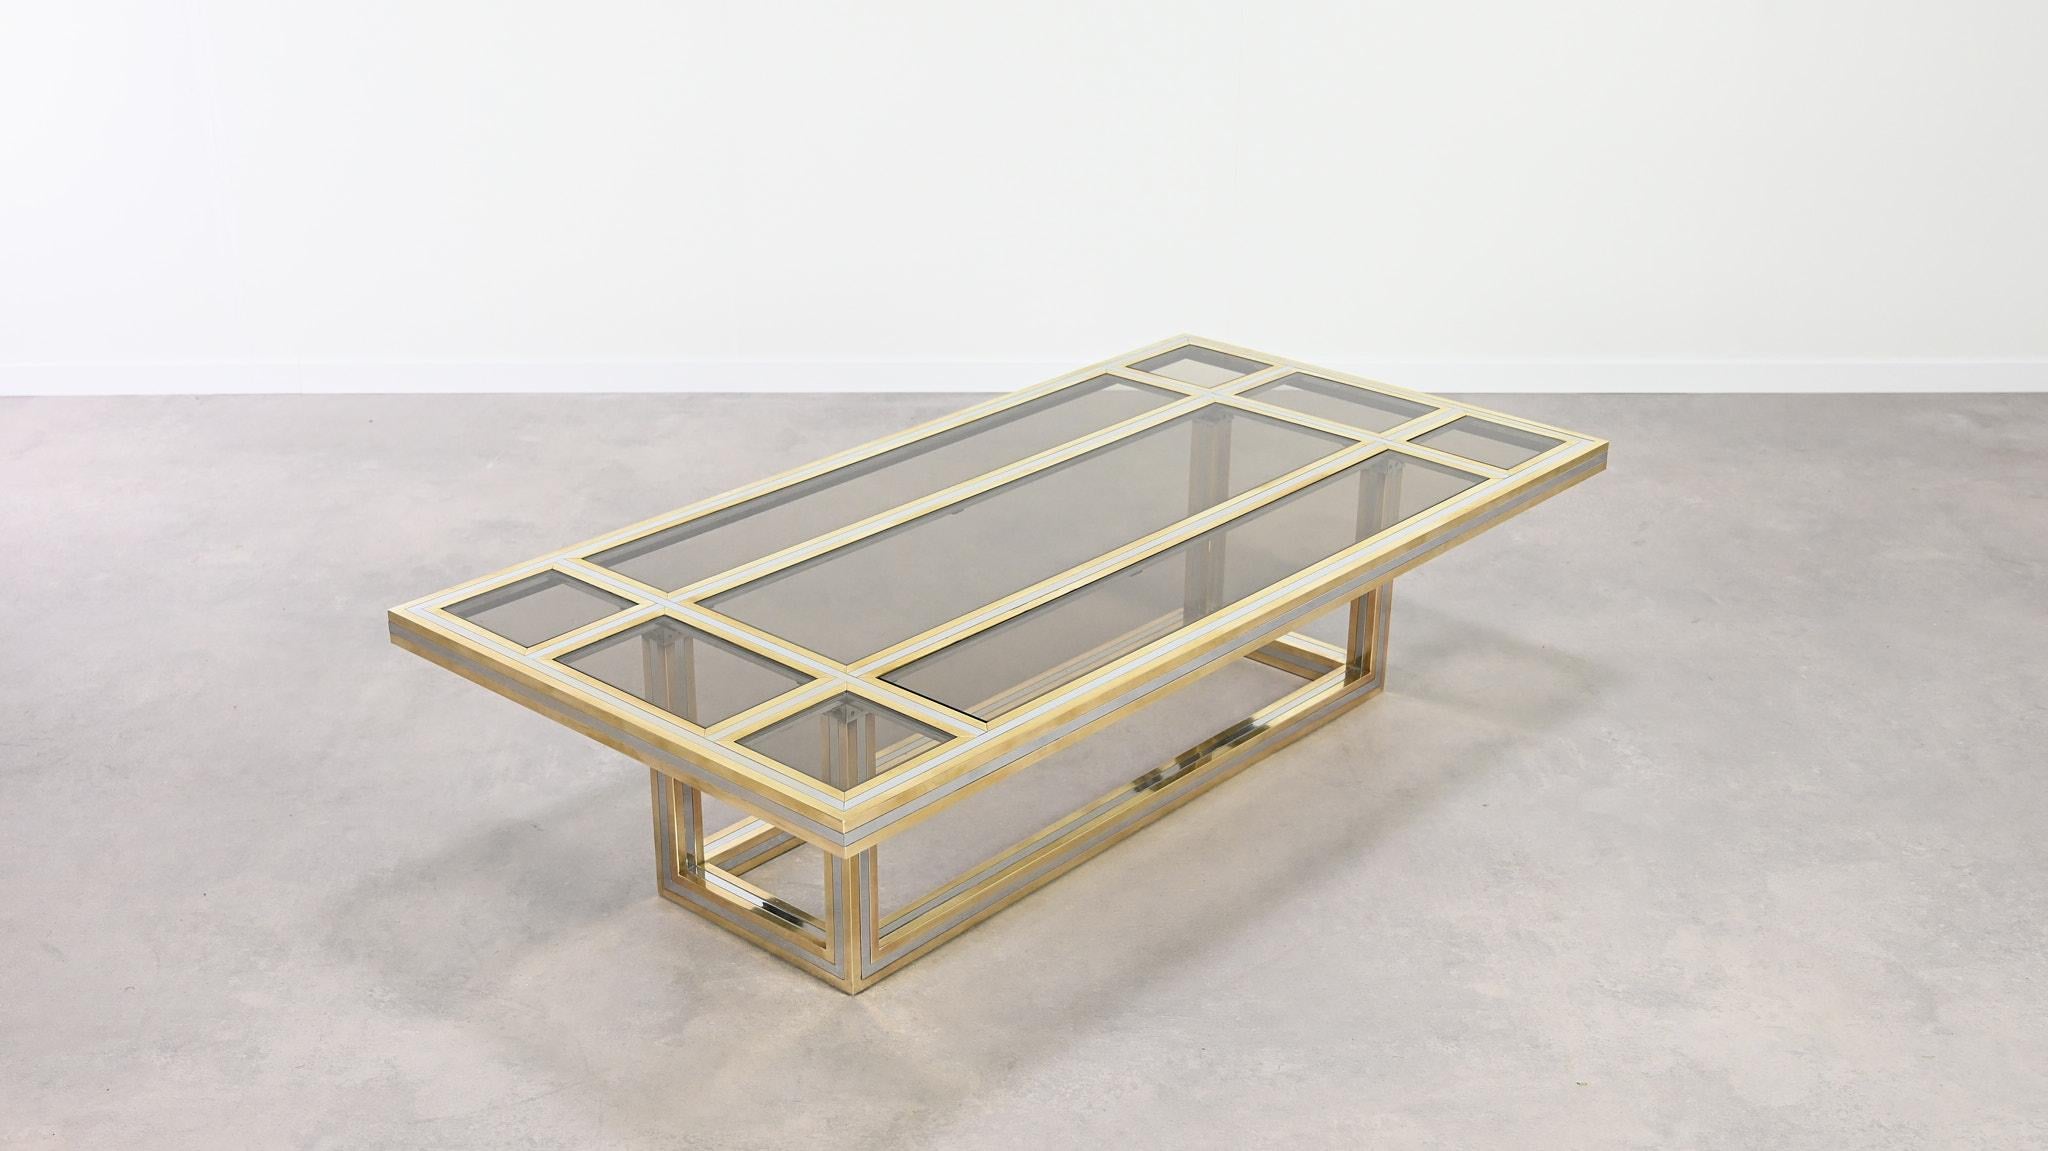 Elegant coffee table by Italian designer Romeo Rega. This coffee table, designed and manufactured in the seventies, is made of a brass and chromed brass structure featuring smoked glass plates on the top. The table is not signed, as not every Romeo